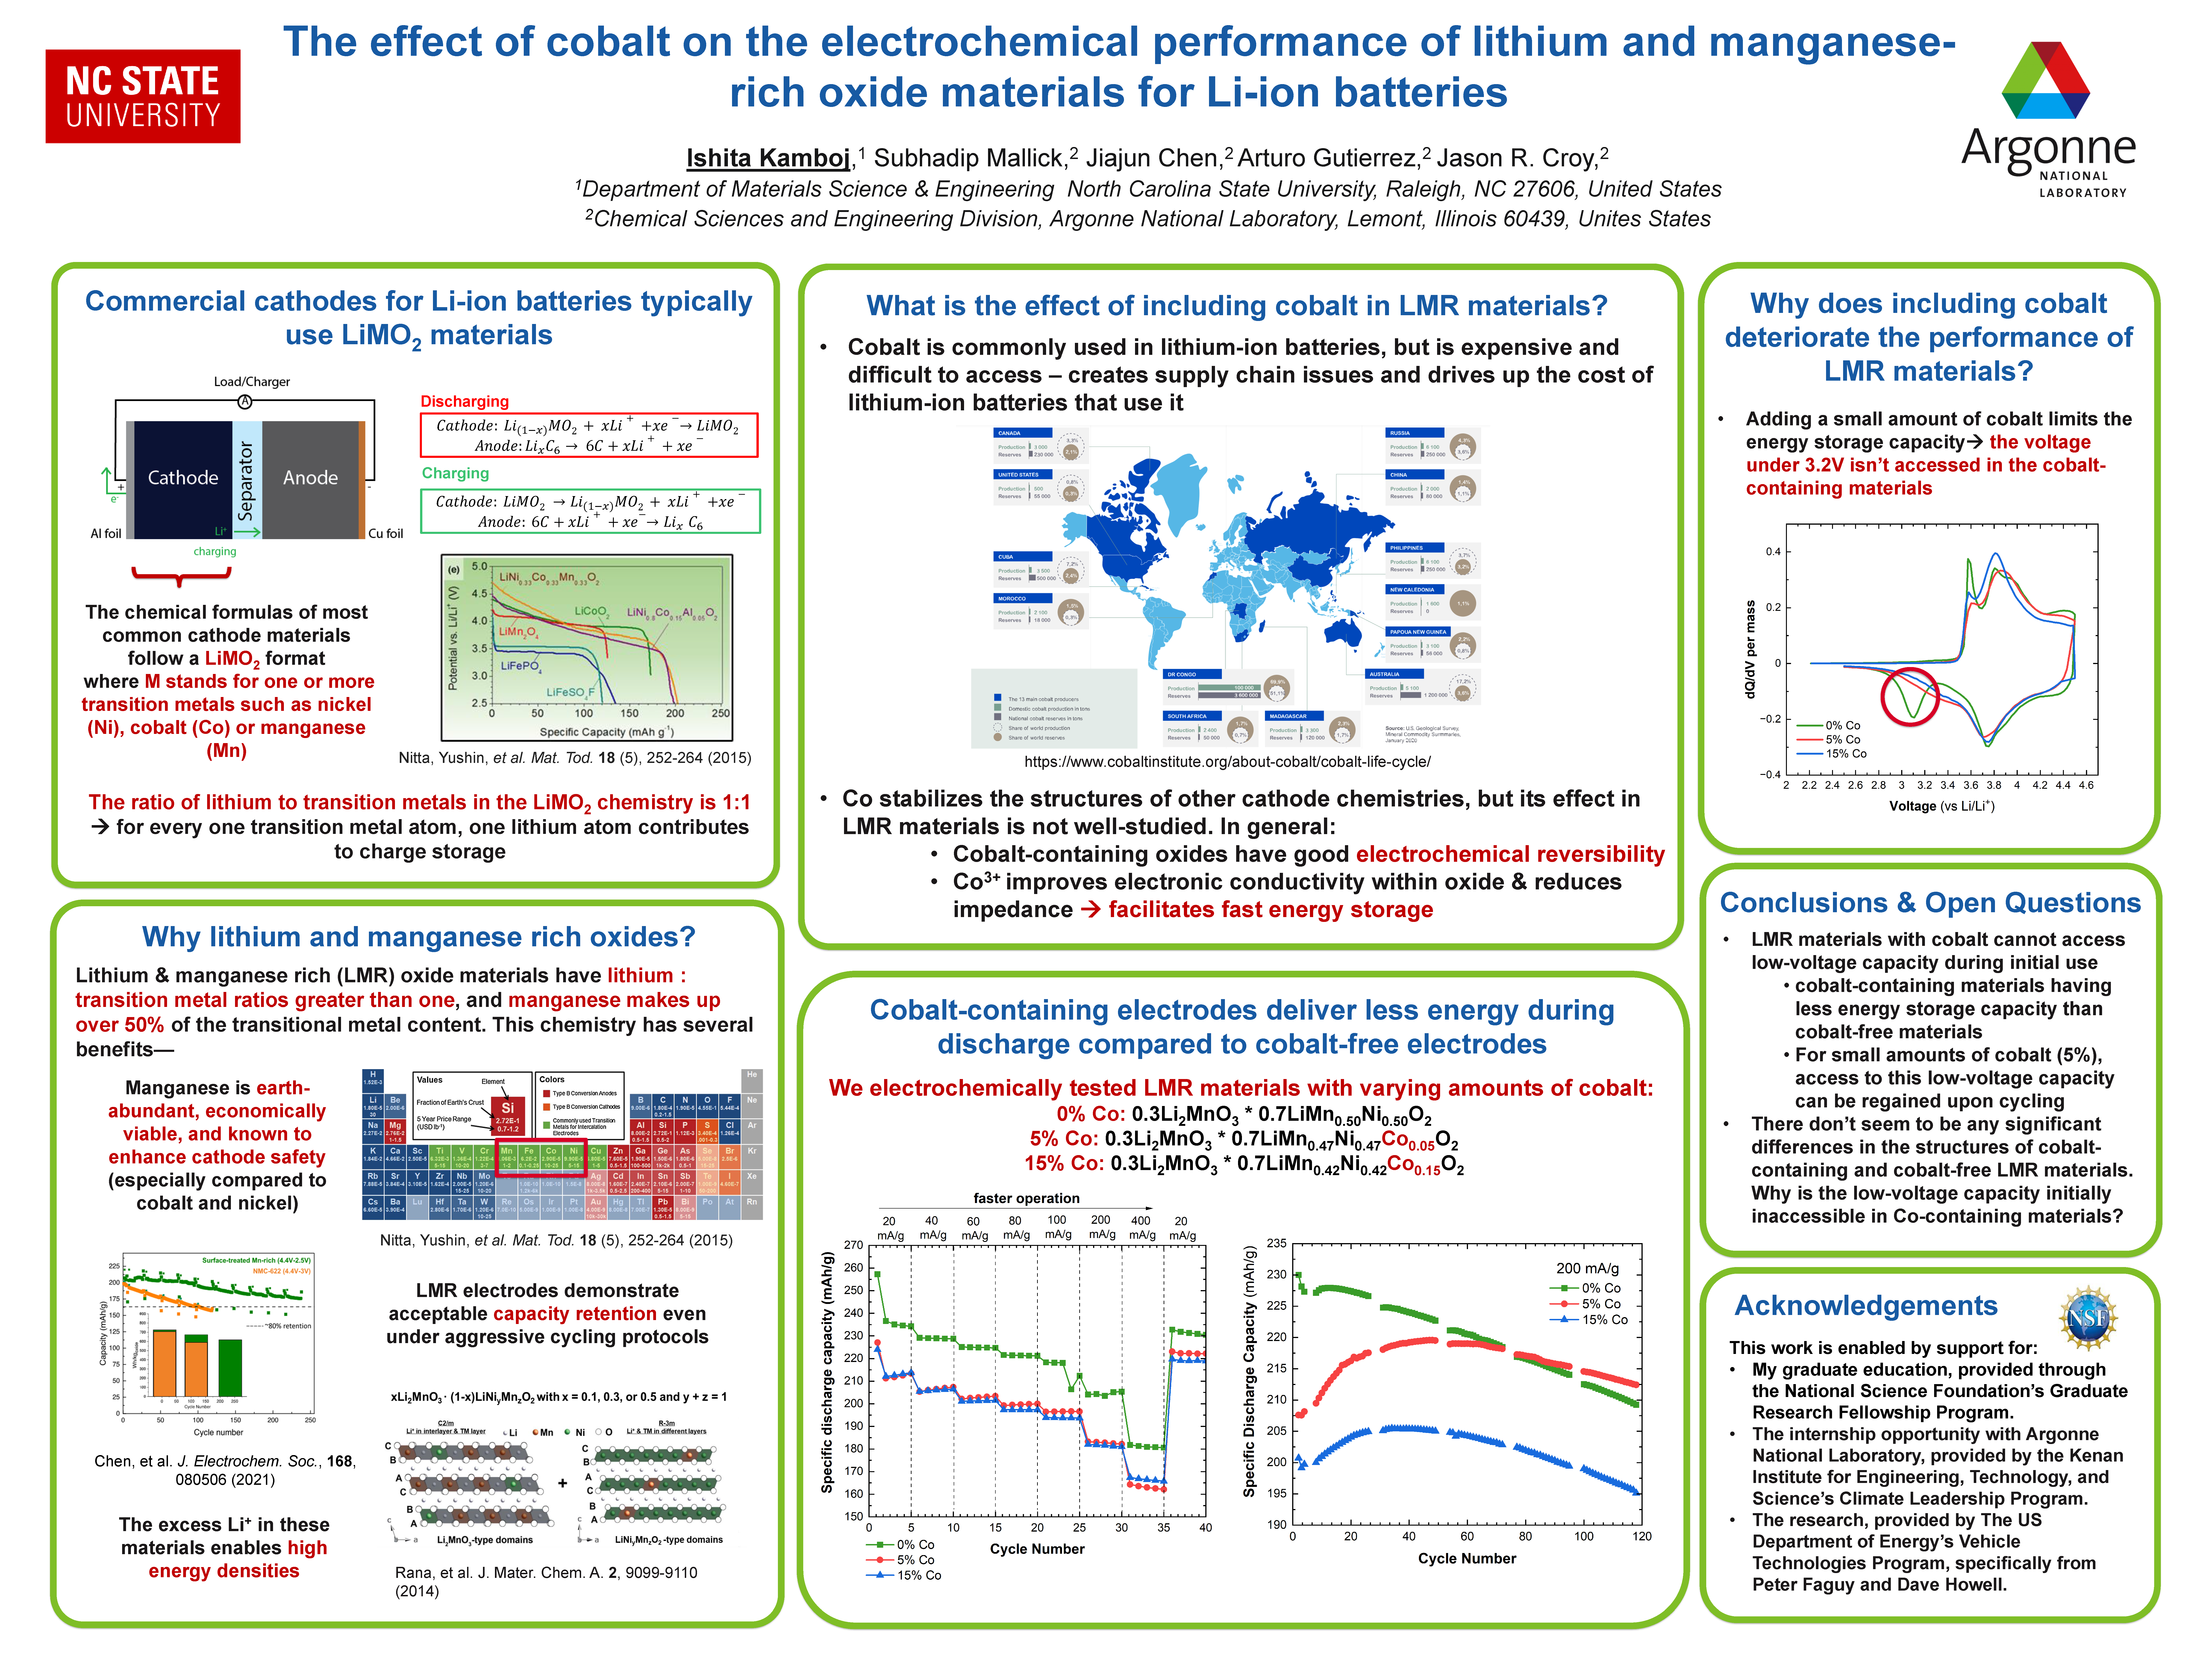 image of Ishita Kamboj's poster, "The effect of cobalt on the electrochemical performance of lithium and manganese-rich oxide materials for Li-ion batteries"